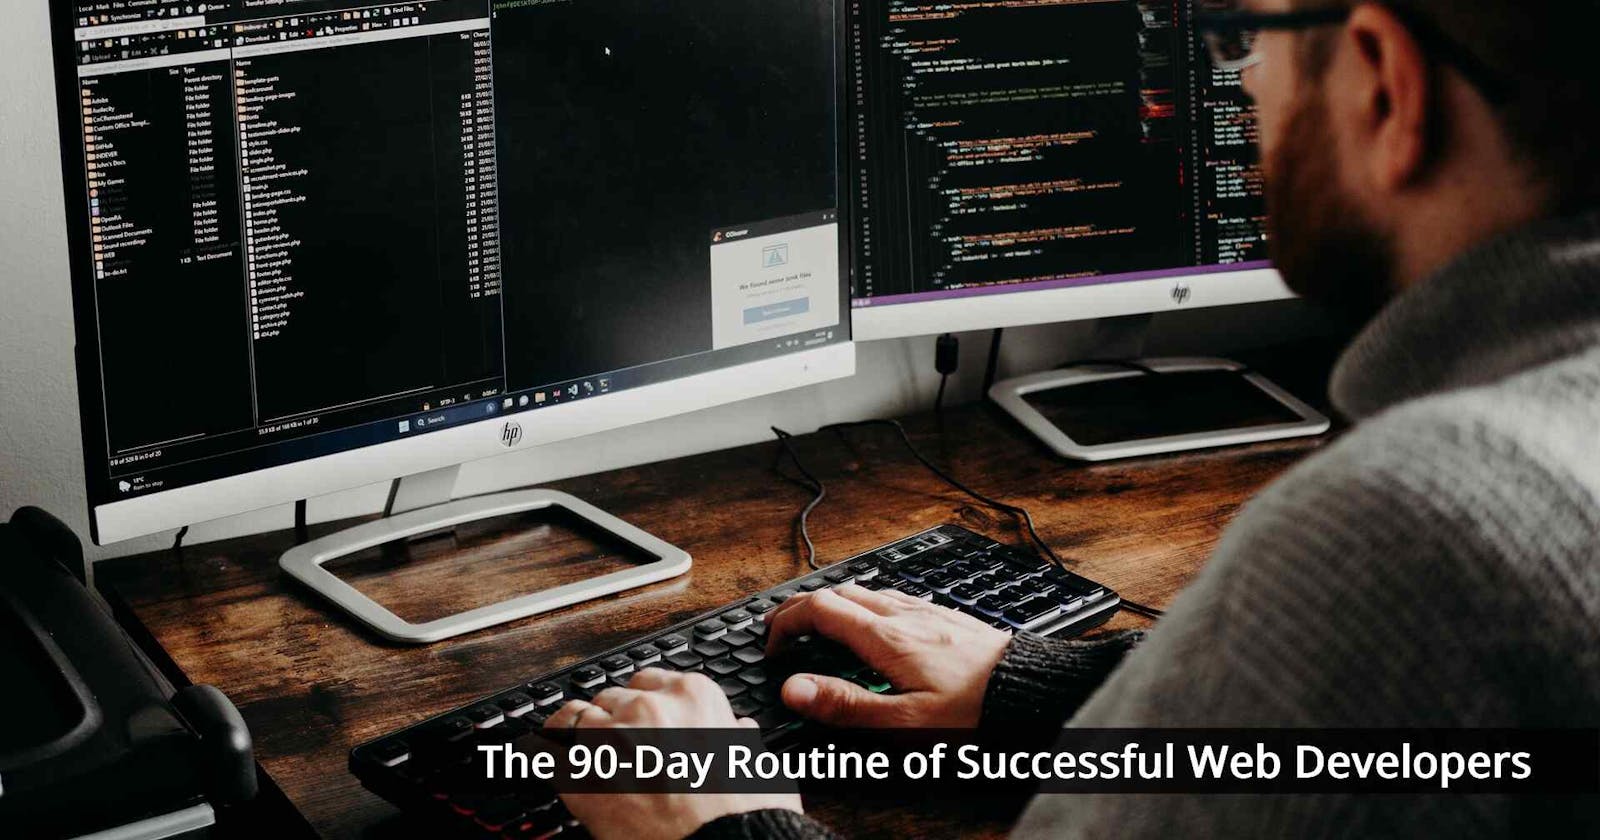 The 90-Day Routine of Successful Web Developers